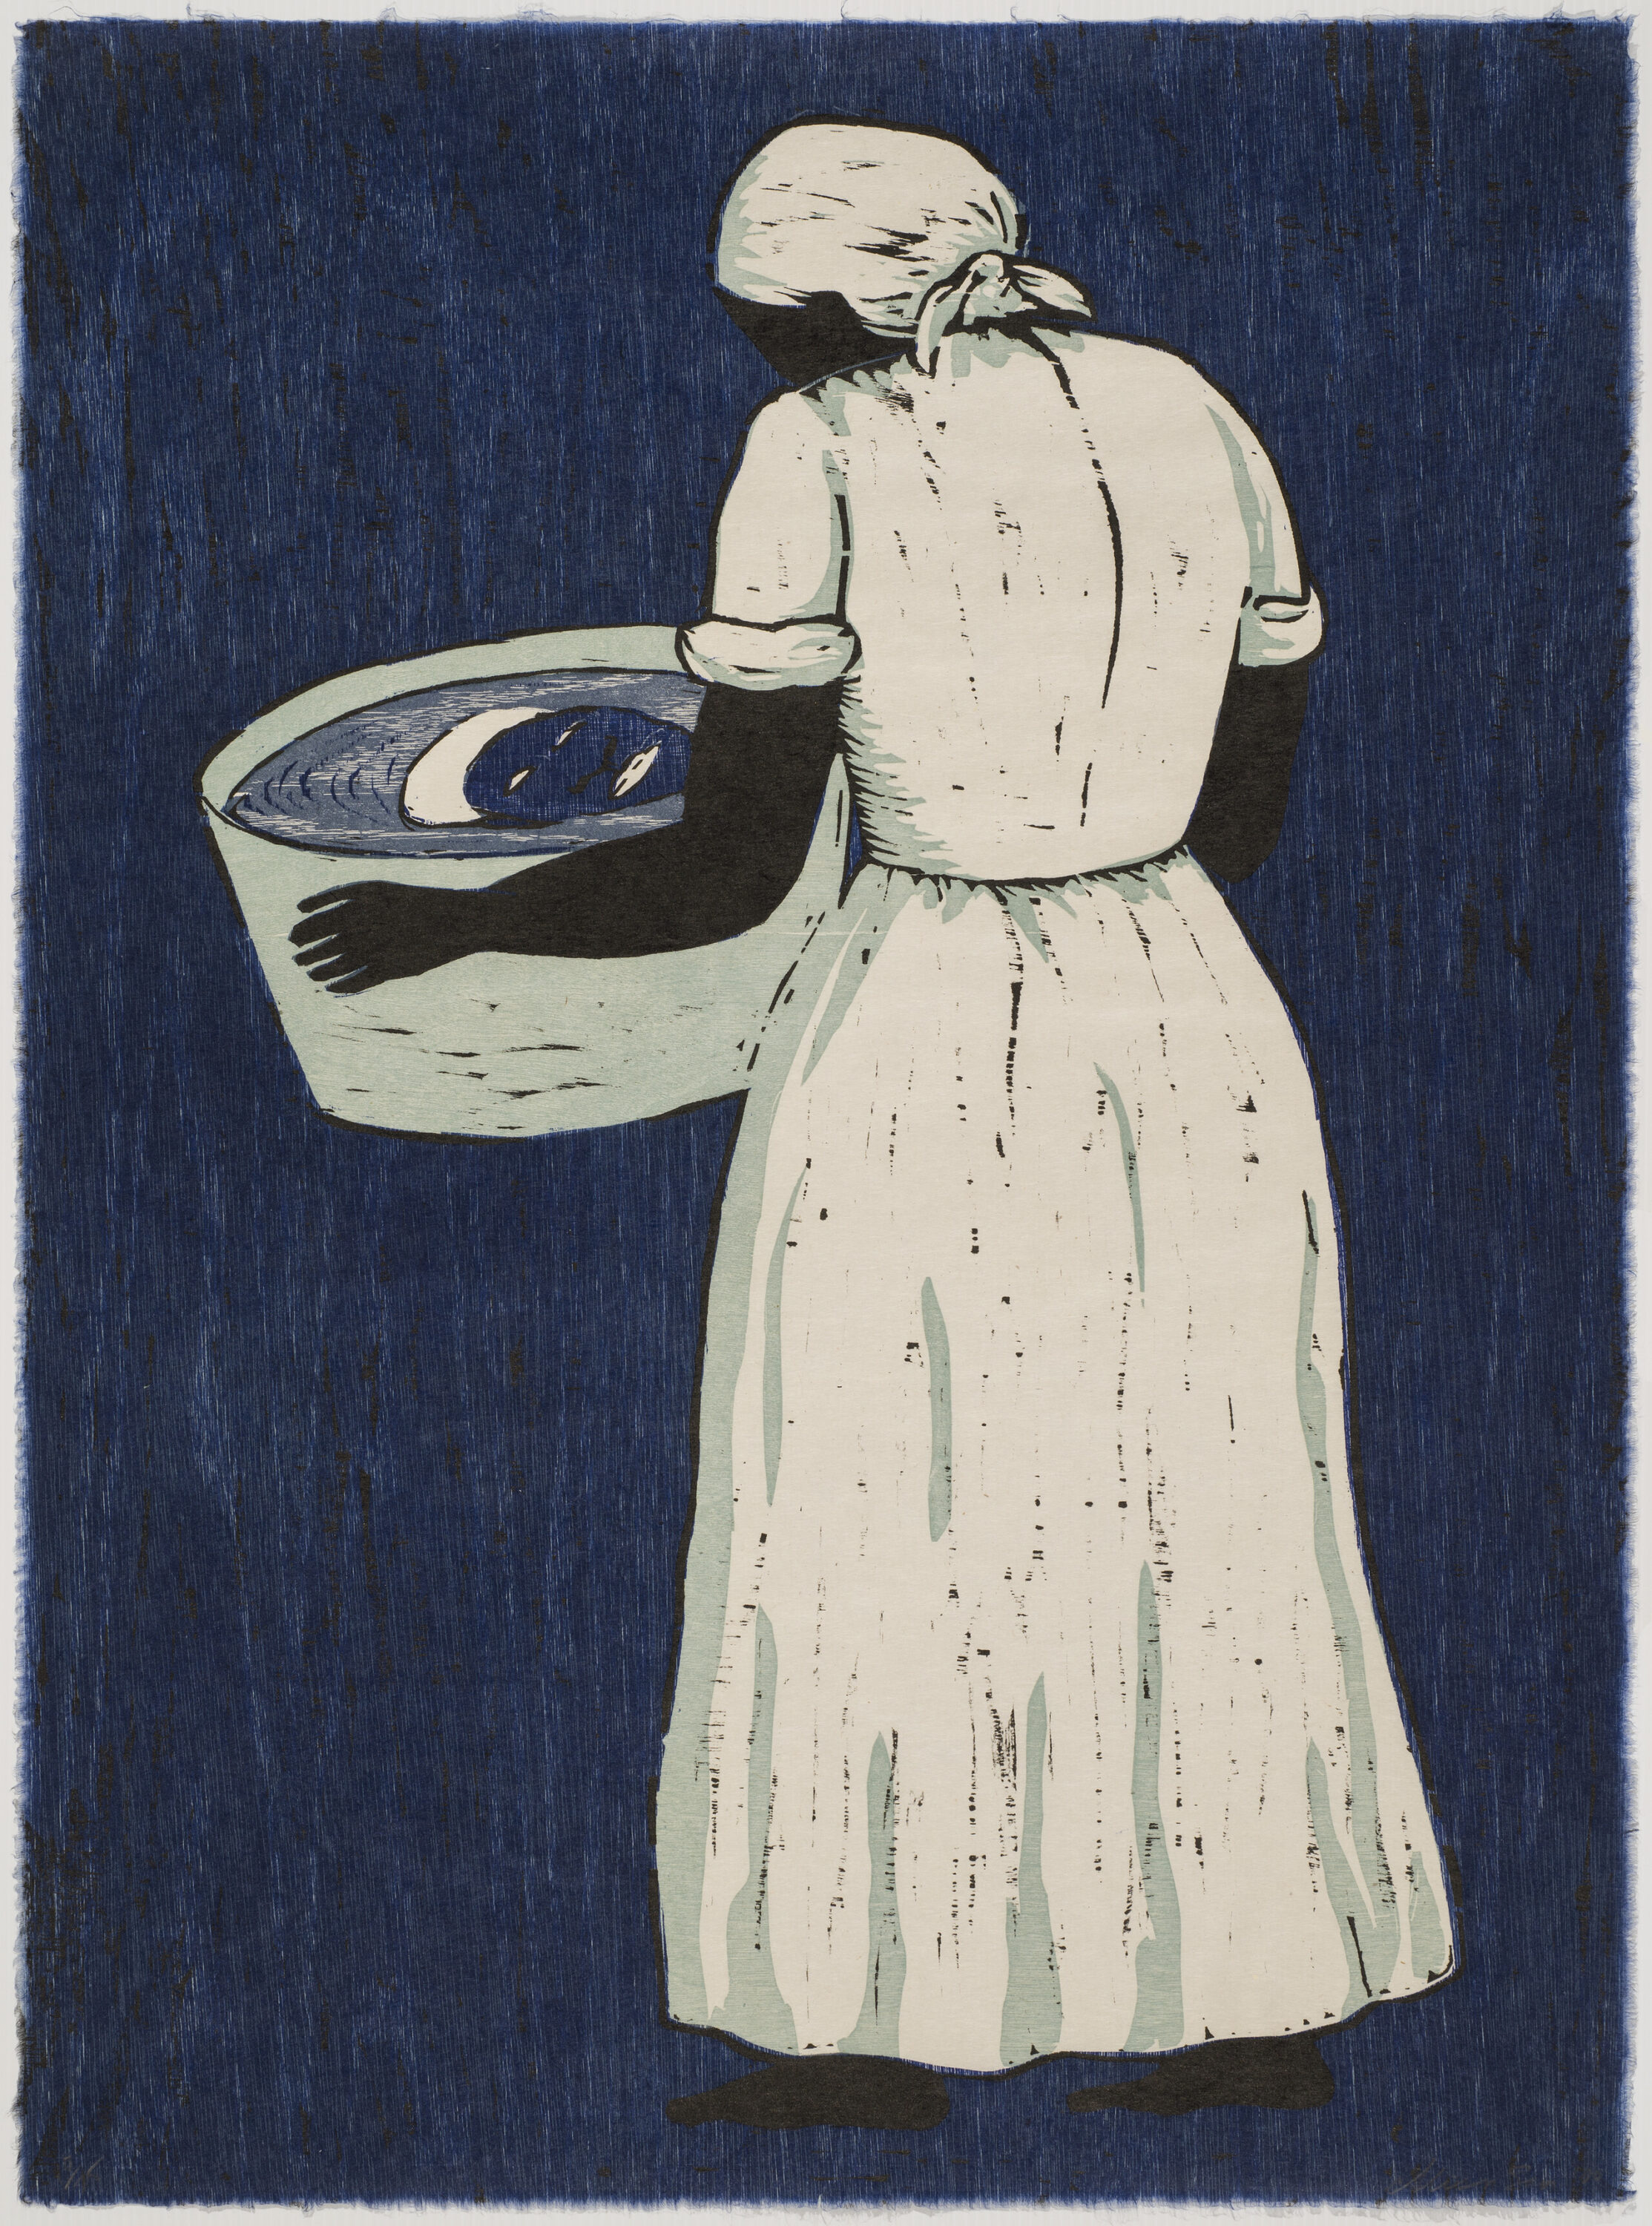 A woodcut print shows a barefoot Black woman from the back at a slight angle holding a washtub. Her face is visible only via the reflection in the tub water.